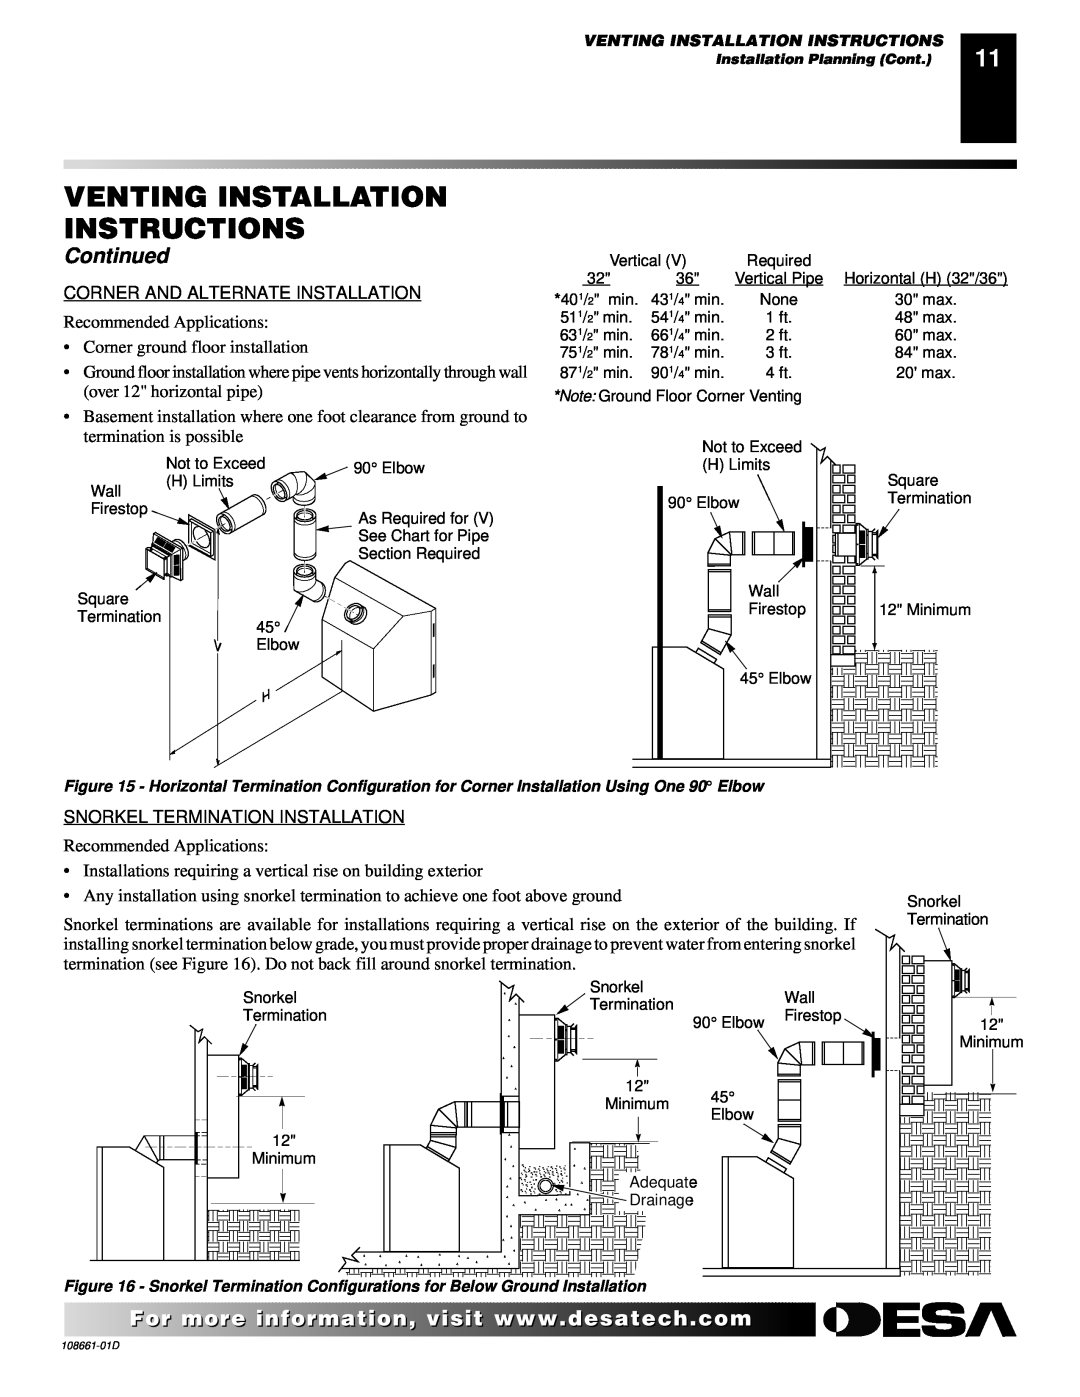 Desa CTDV36NR, (V)T32N, (V)T36N SERIES Venting Installation Instructions, Continued, Recommended Applications 